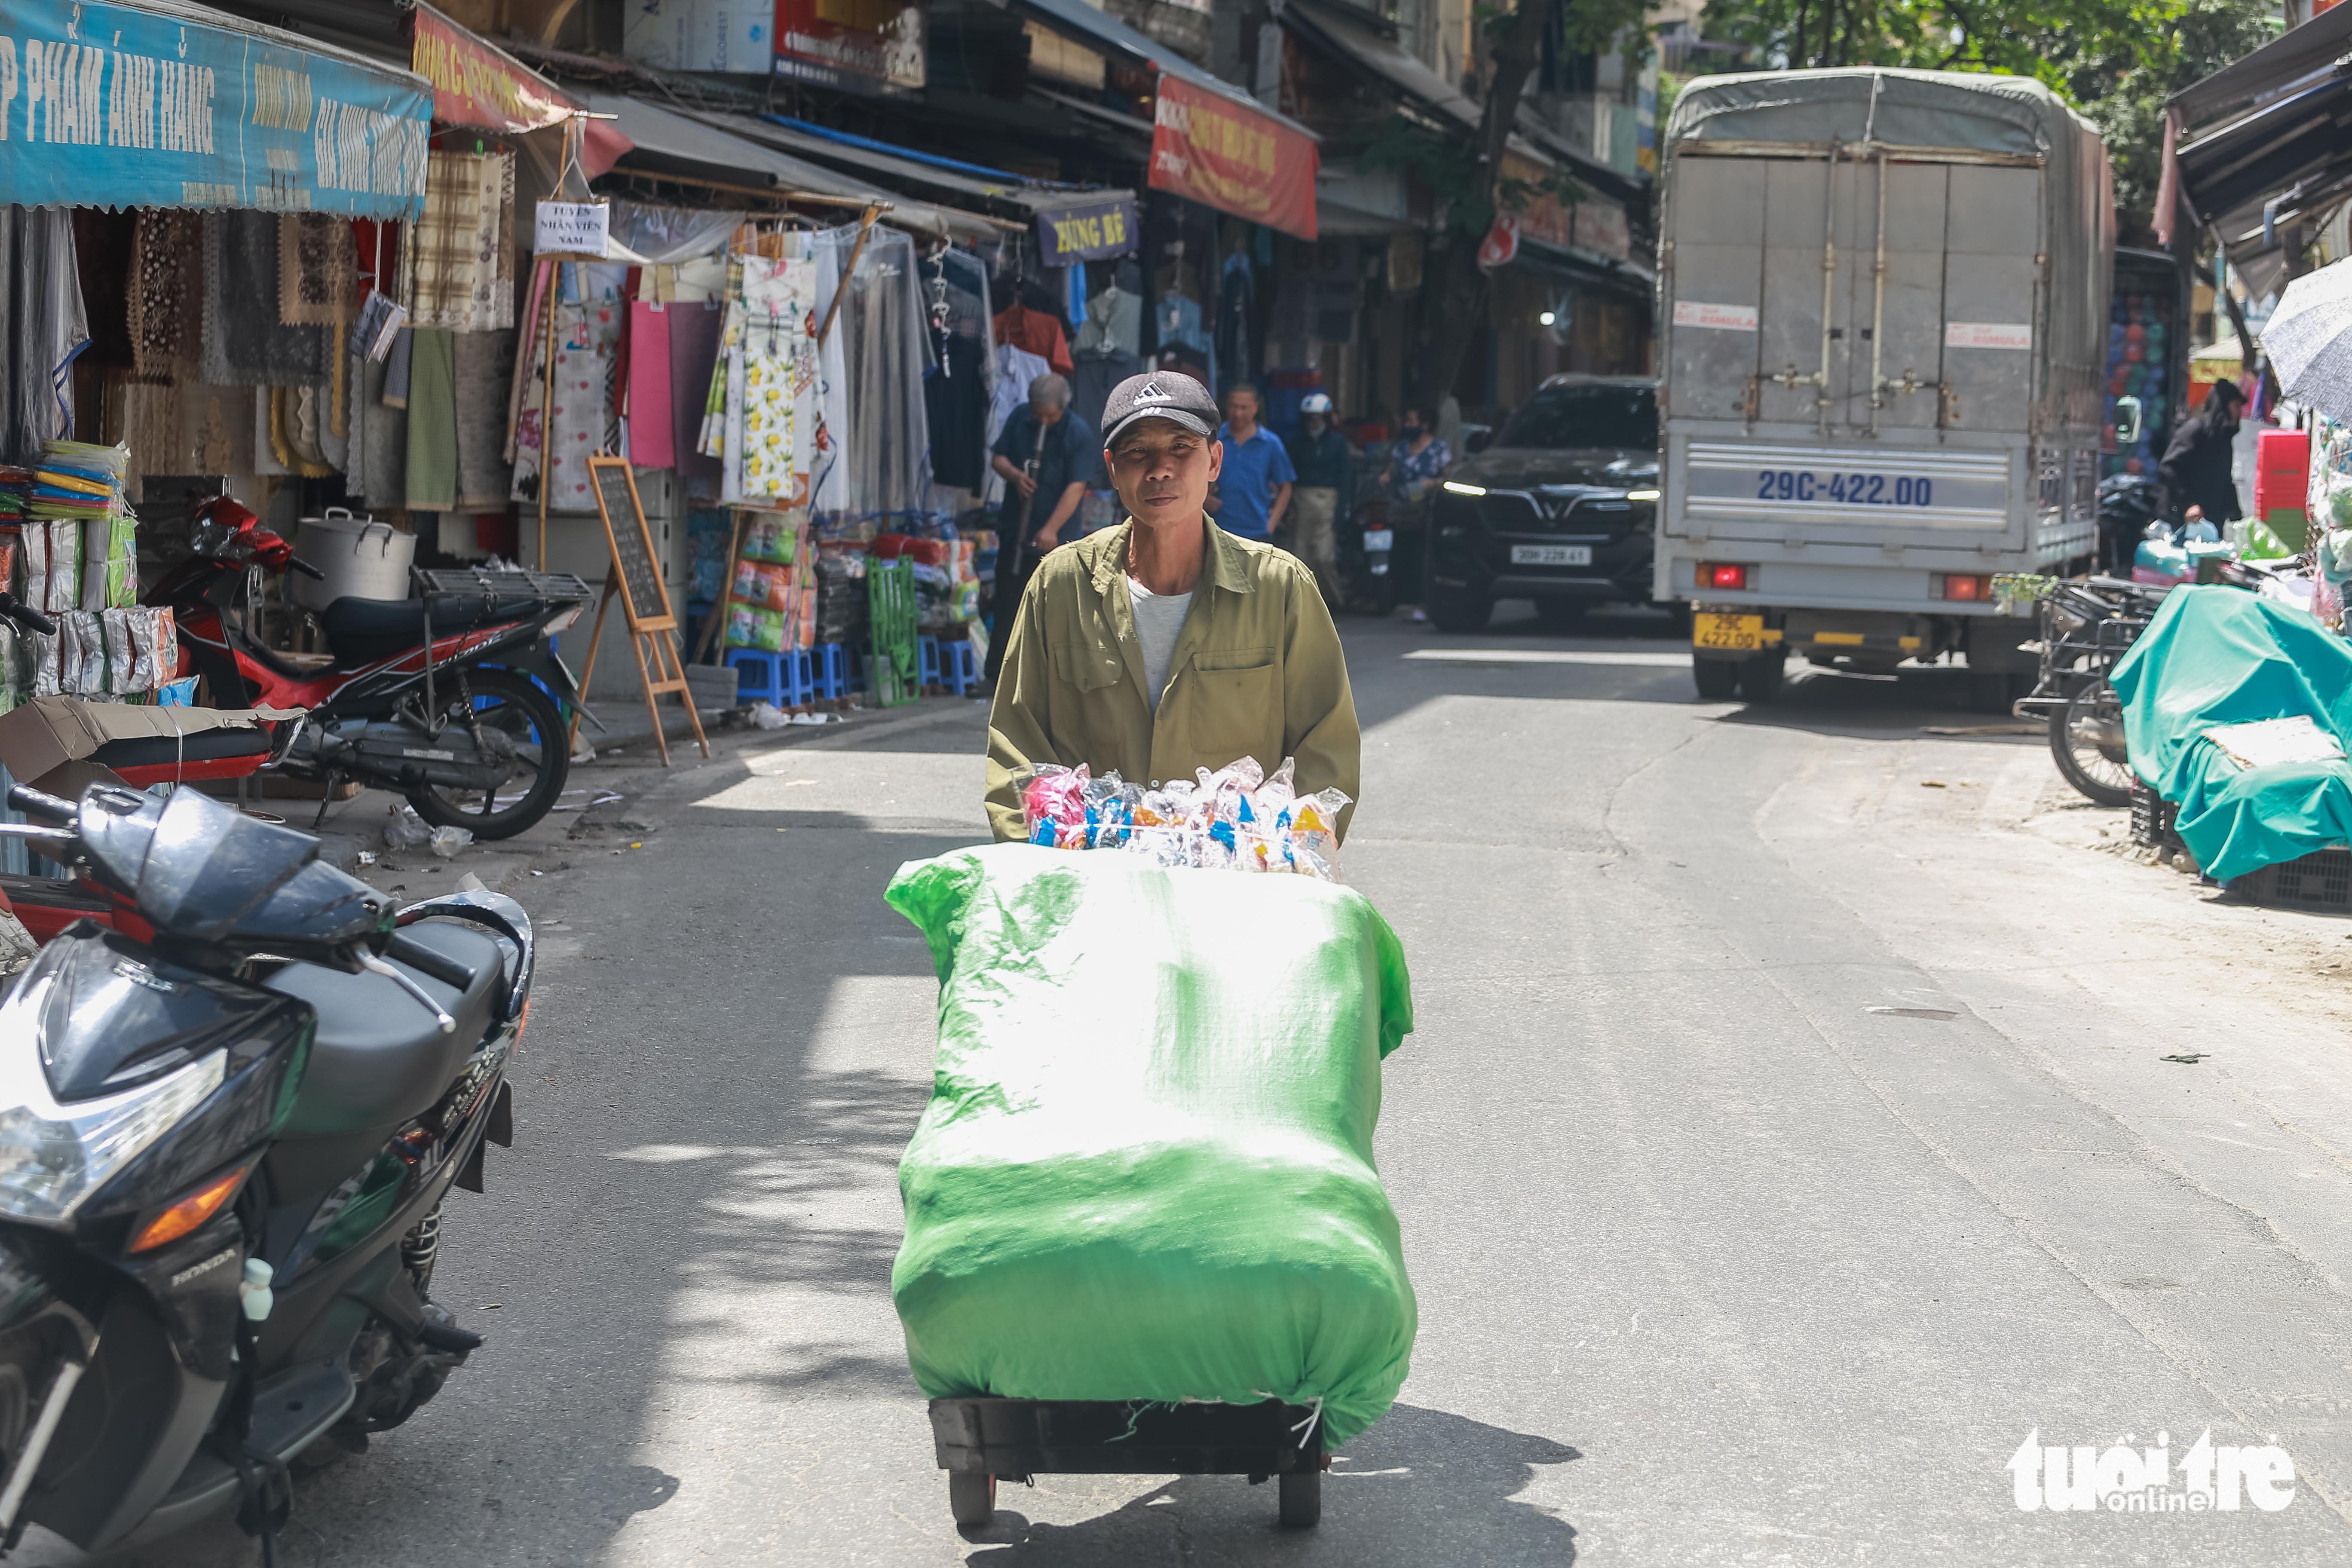 A porter works in the hot weather at a market in Hanoi, June 21, 2022. Photo: Pham Tuan / Tuoi Tre